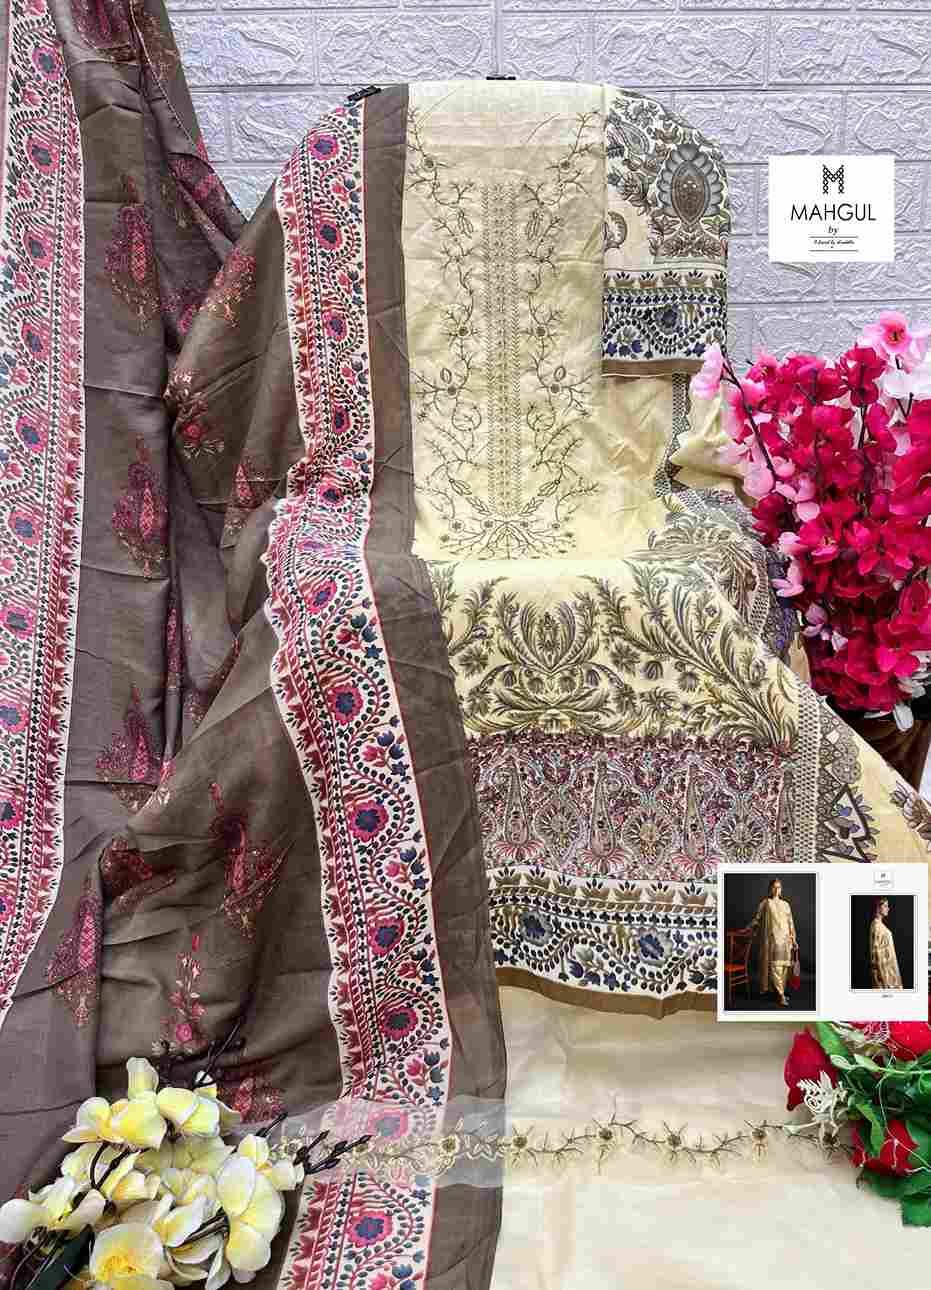 Bin Saeed Vol-2 By Mahgul 2001-A To 2001-D Series Designer Pakistani Suits Beautiful Fancy Stylish Colorful Party Wear & Occasional Wear Pure Lawn Cotton With Embroidery Dresses At Wholesale Price